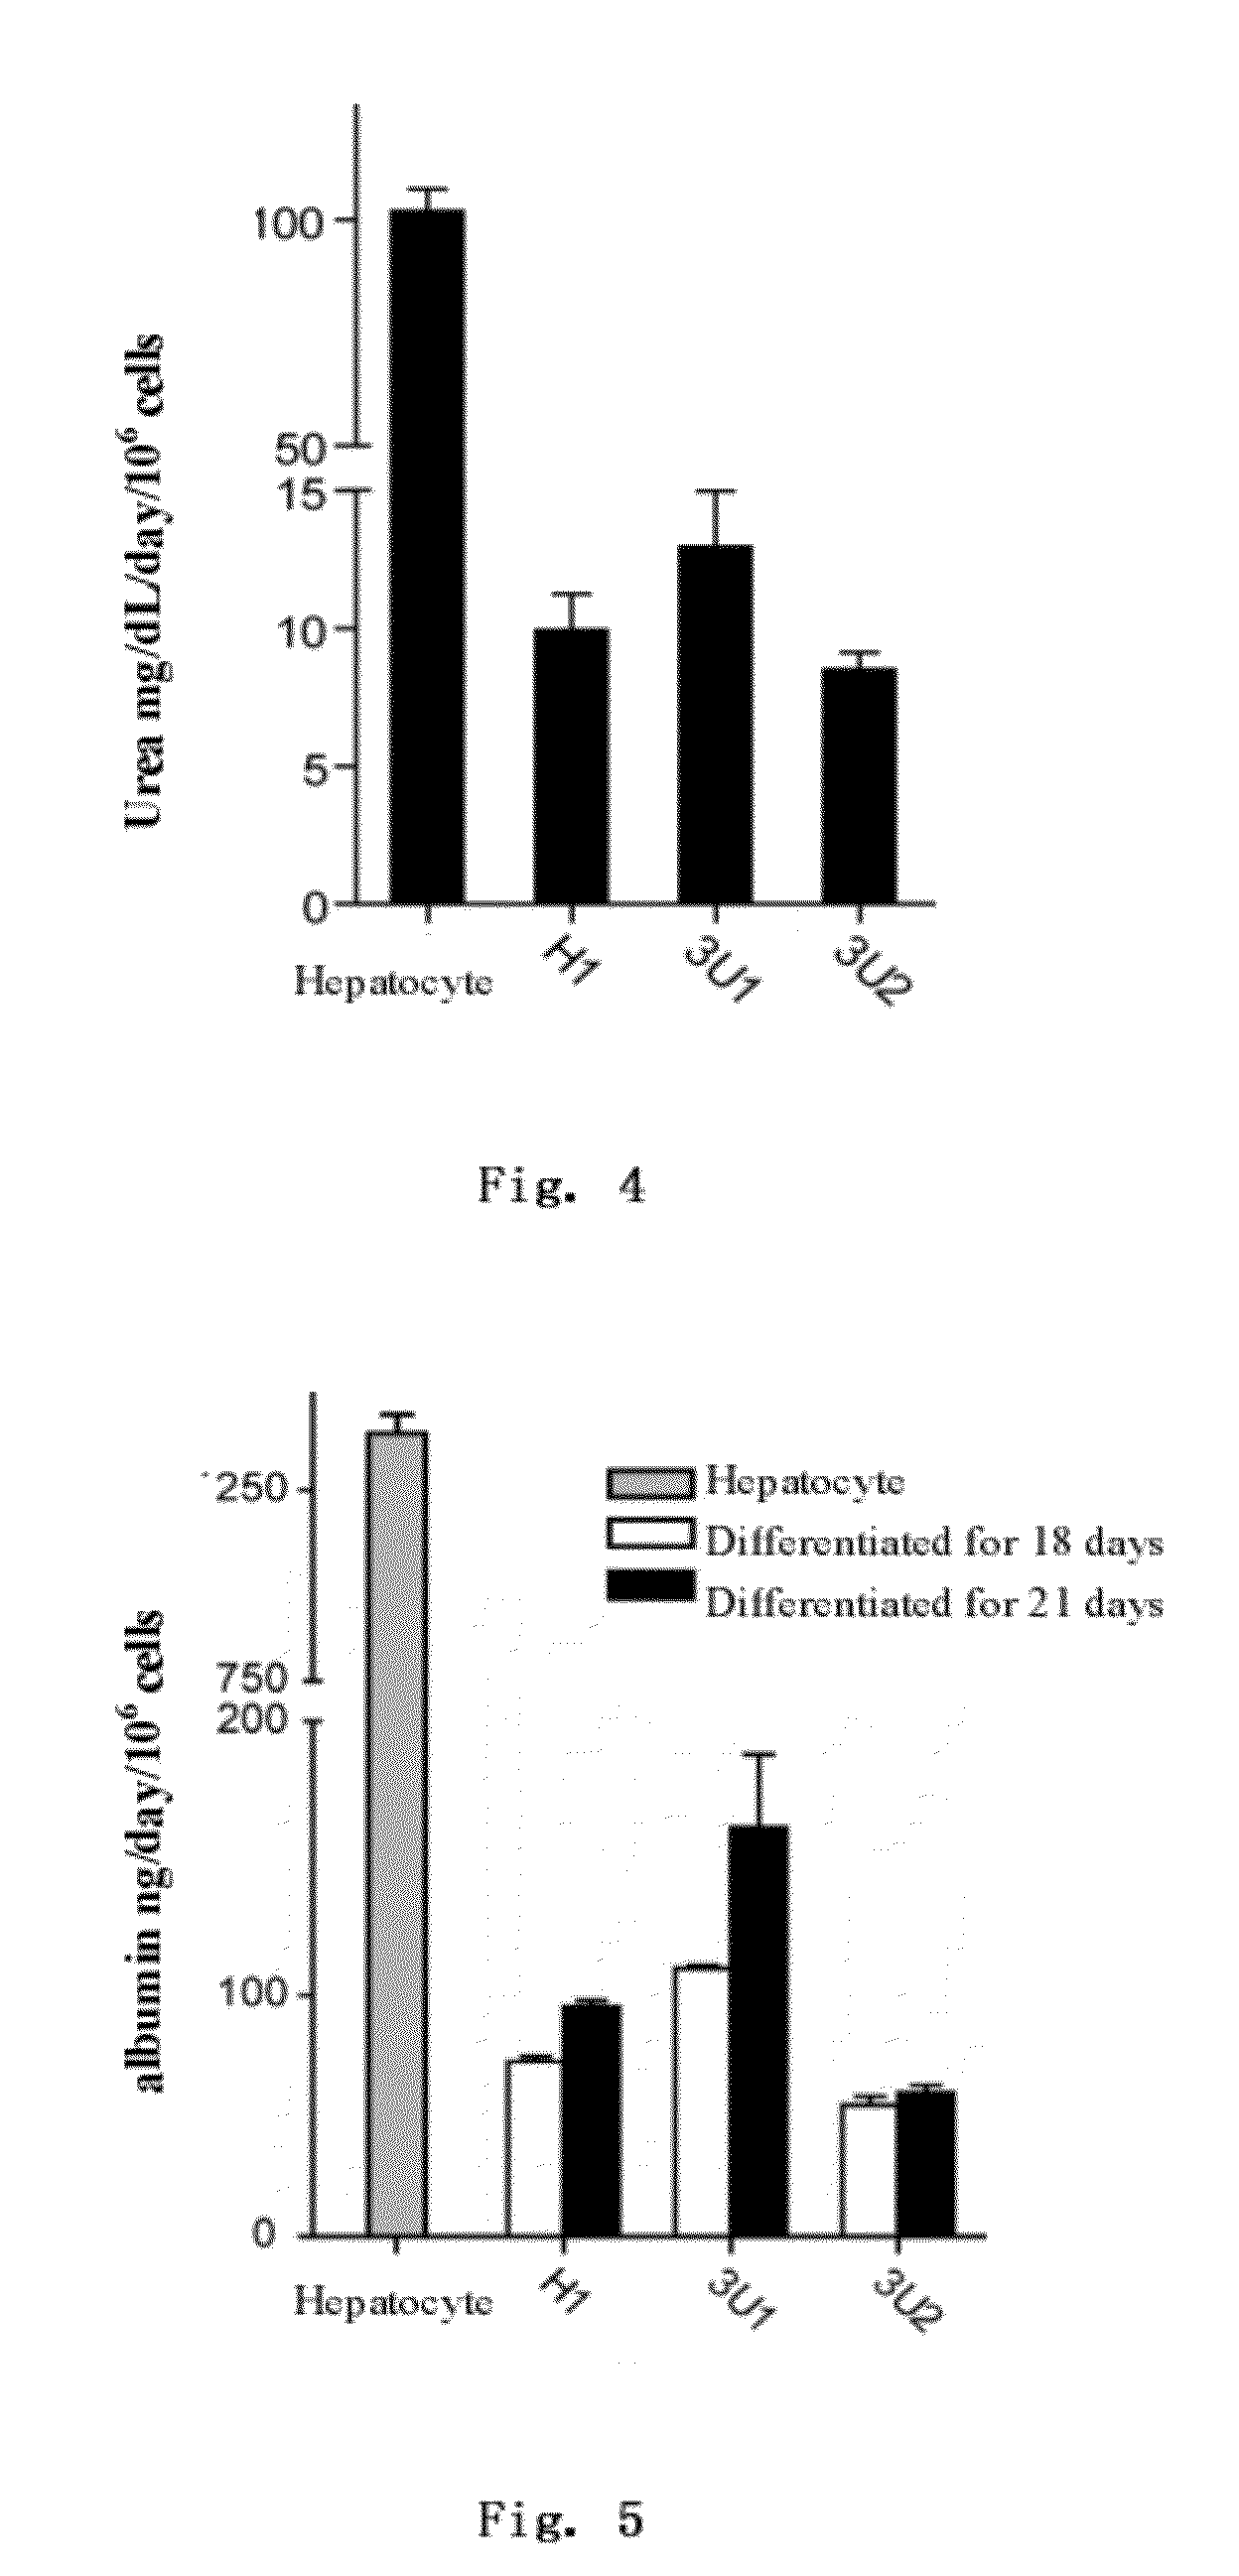 Methods for obtaining hepatocytes, hepatic endoderm cells and hepatic progenitor cells by induced differentiation